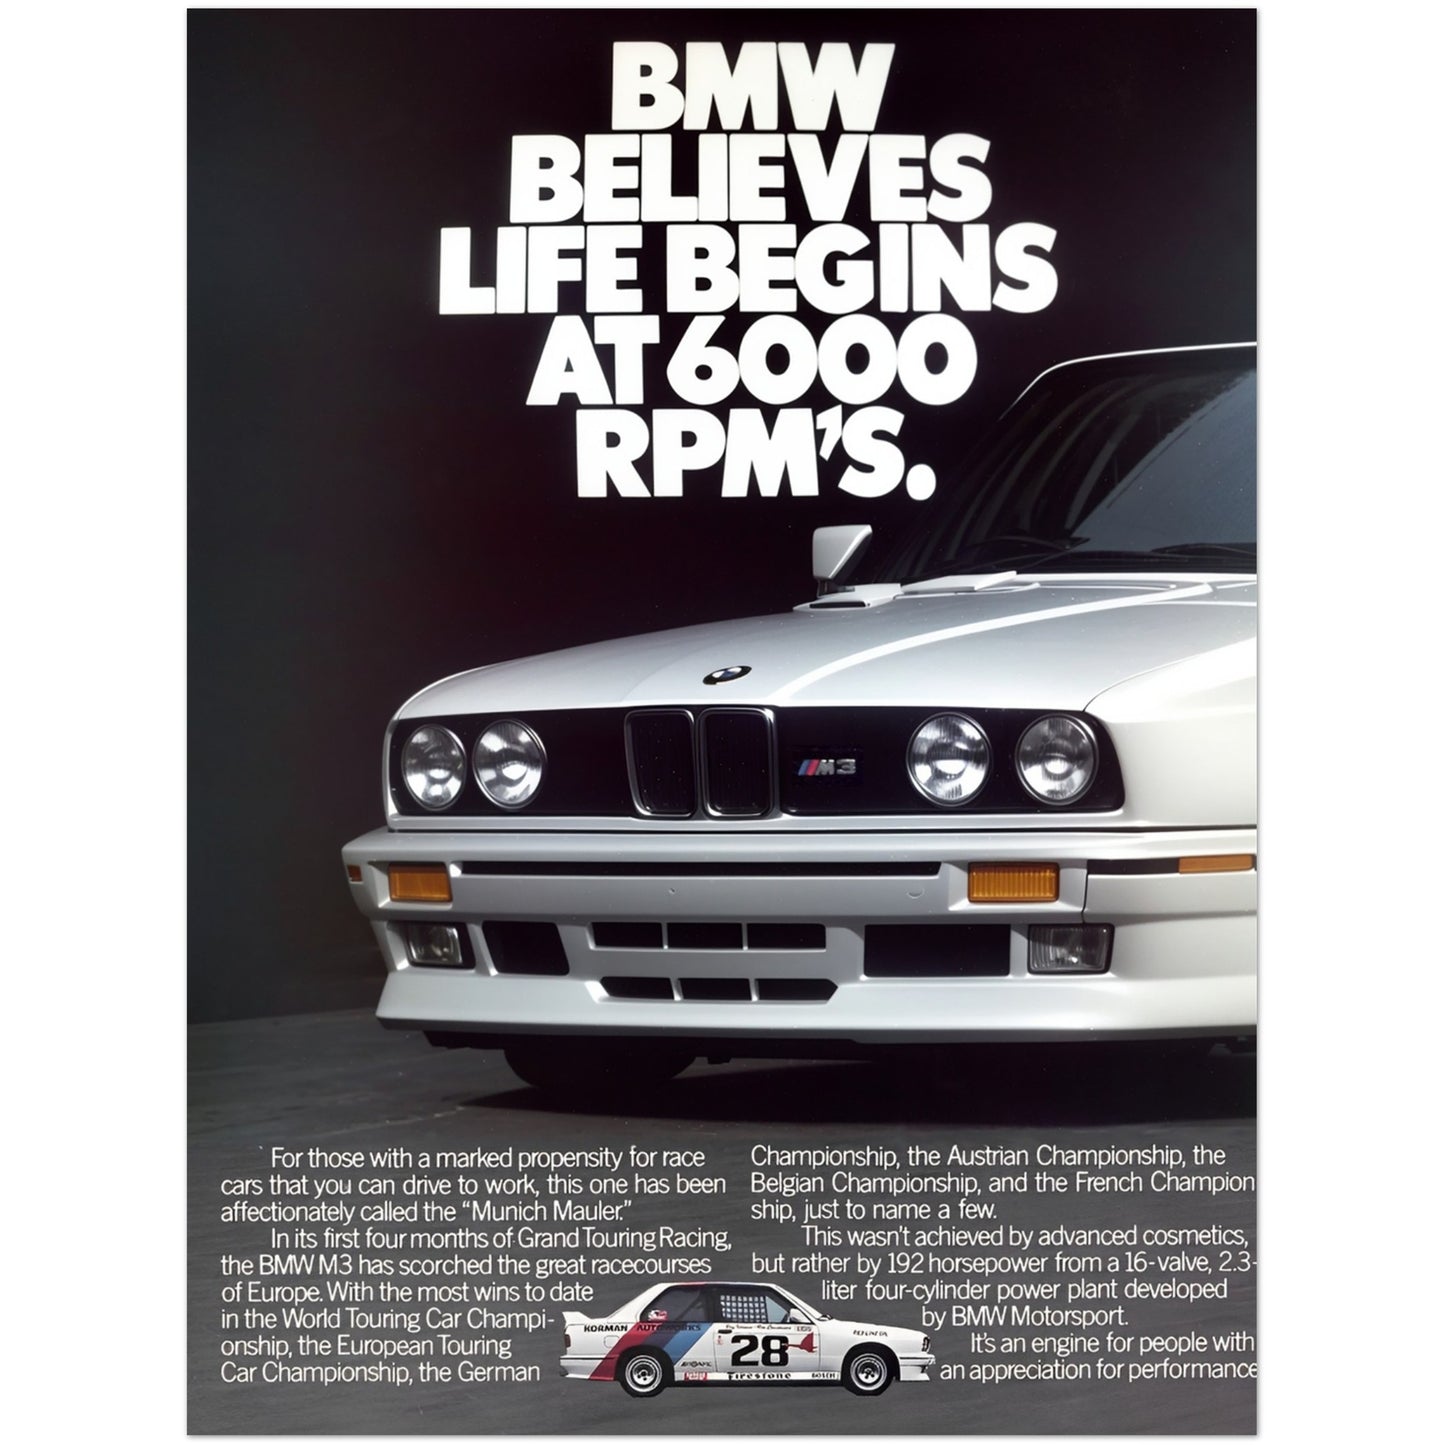 BMW E30 M3 BMW believes life begins at 6000 RPM´s poster – PETROLHEADVINTAGE